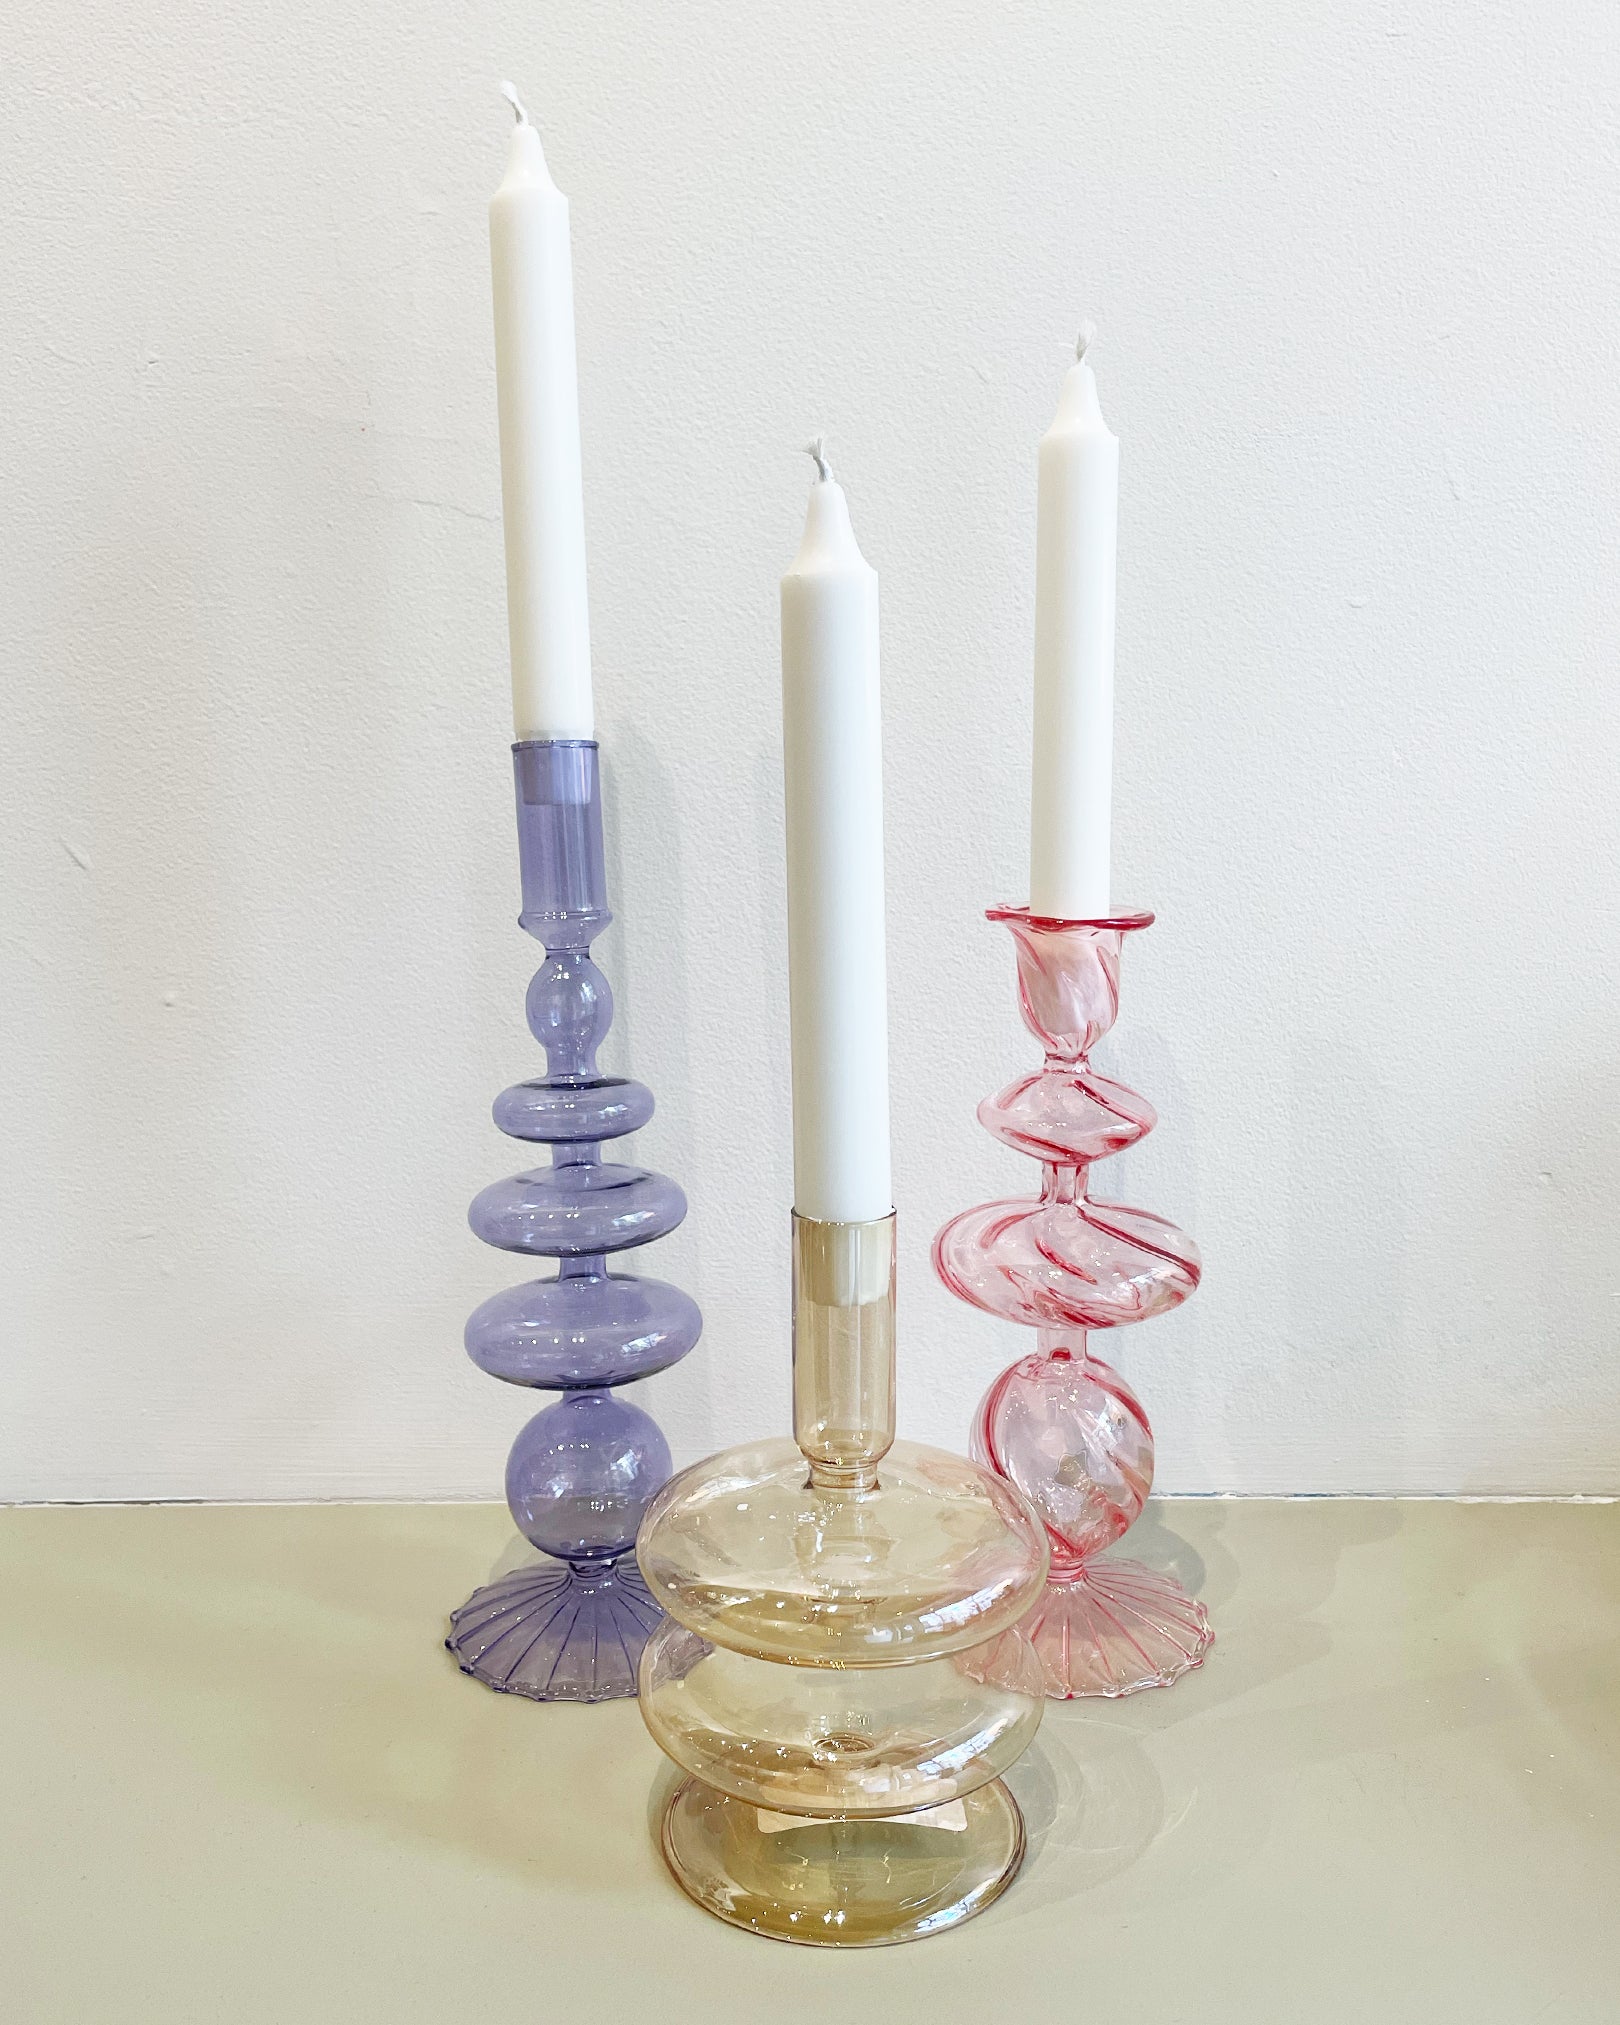 9 CHRISTOPHER Finn Glass Candlestick in Iridescent Brown available at Lahn.shop